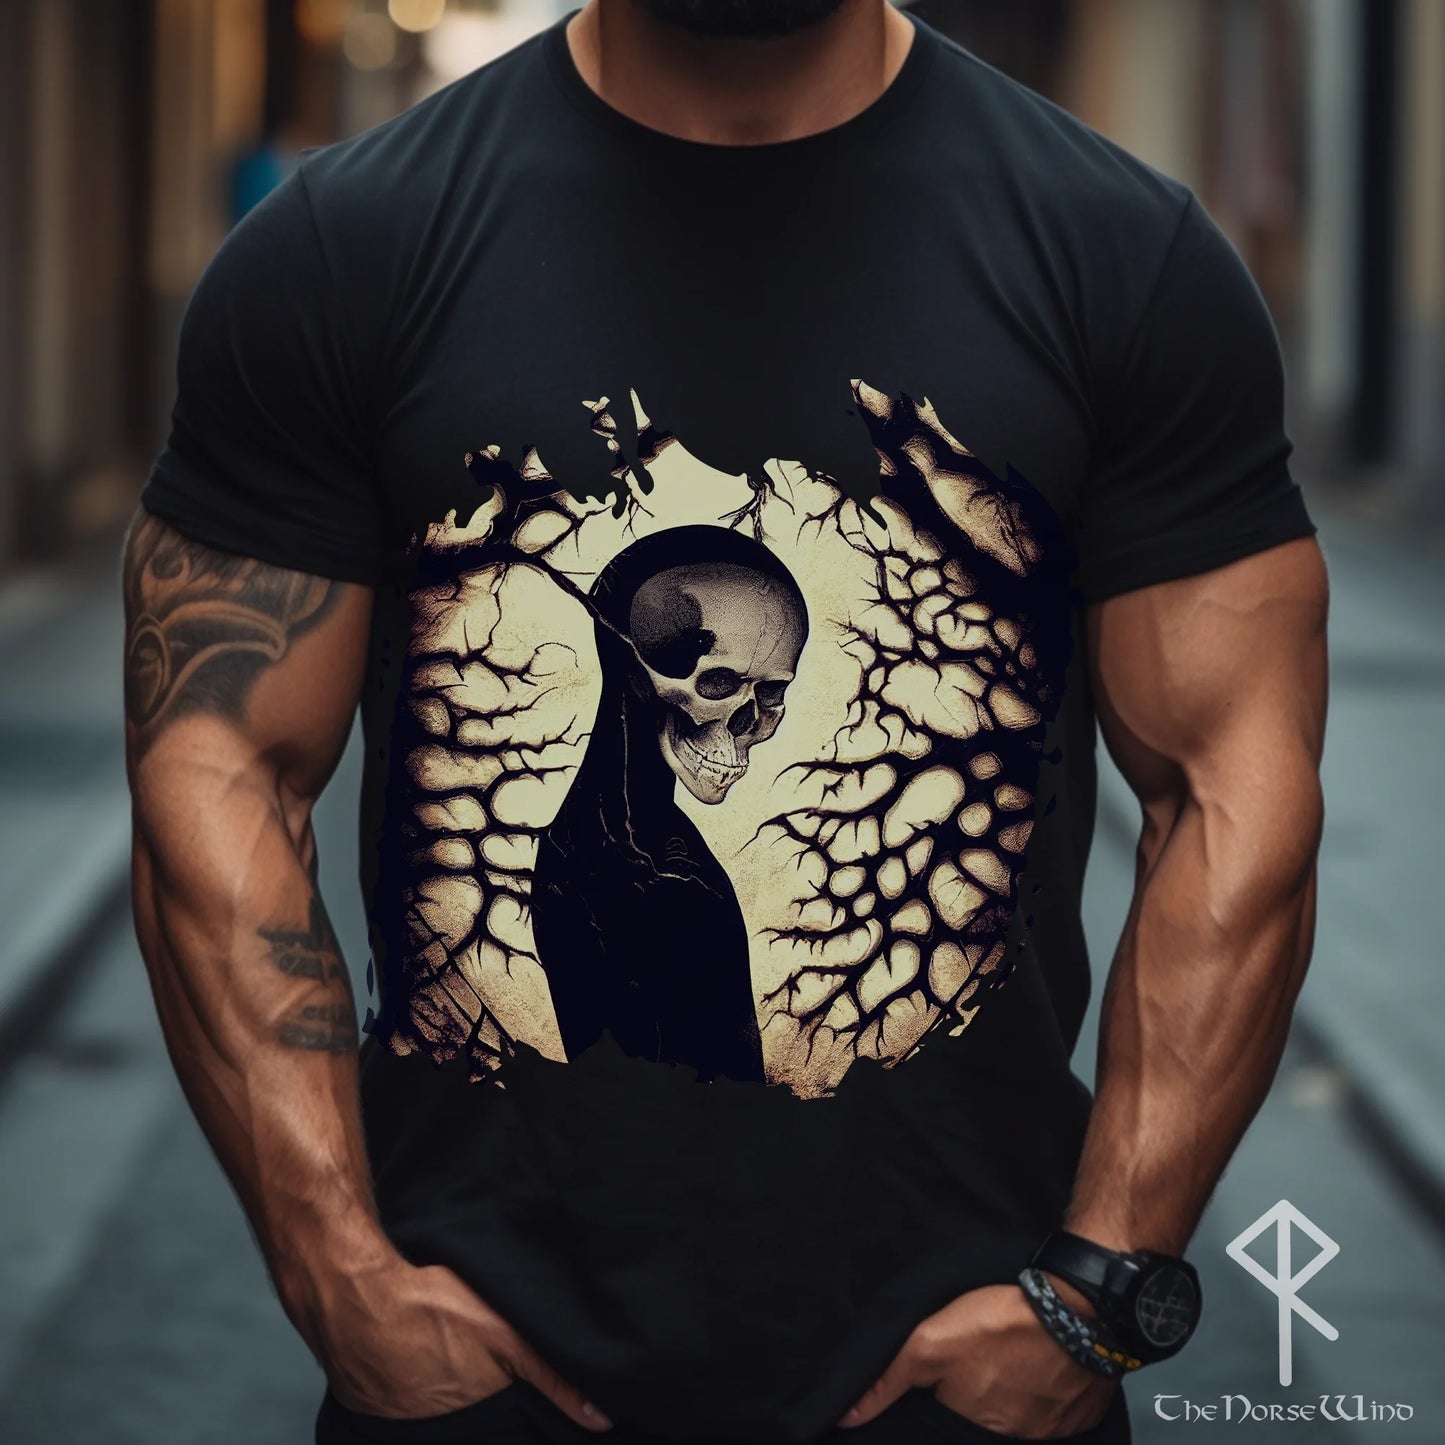 Skull in the Woods T-Shirt, Goth Skeleton Tee, S - 5XL